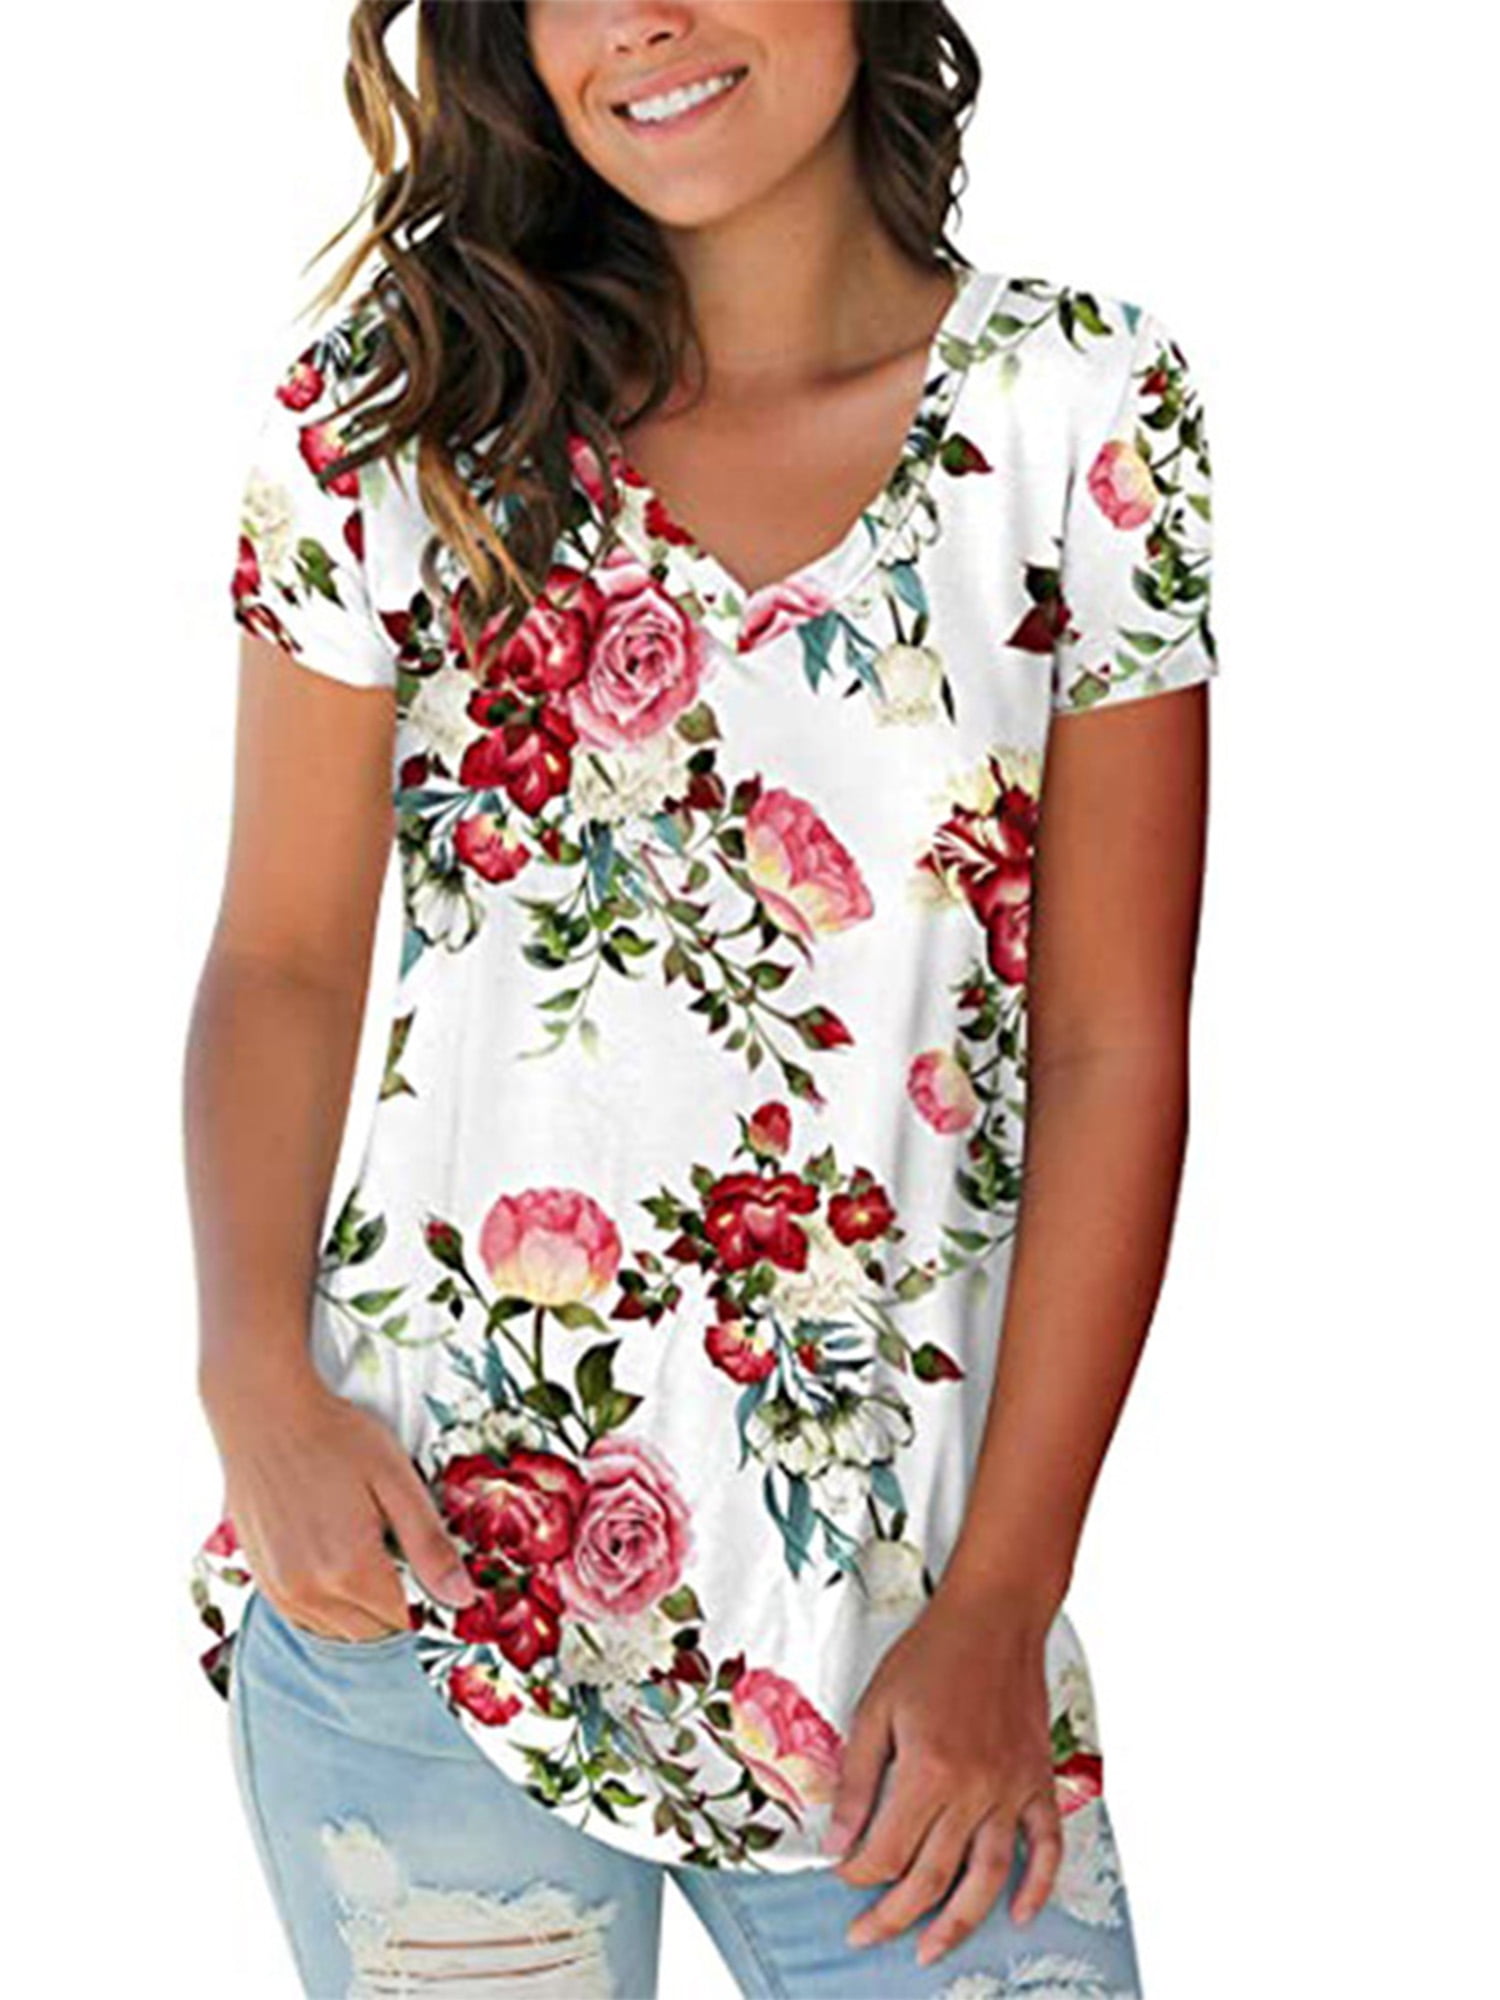 Aukbays Womens T-Shirts Women Summer Casual Slim Fit Floral Graphic Vintage Tops Shirts Short Sleeve Blouses Tunic 